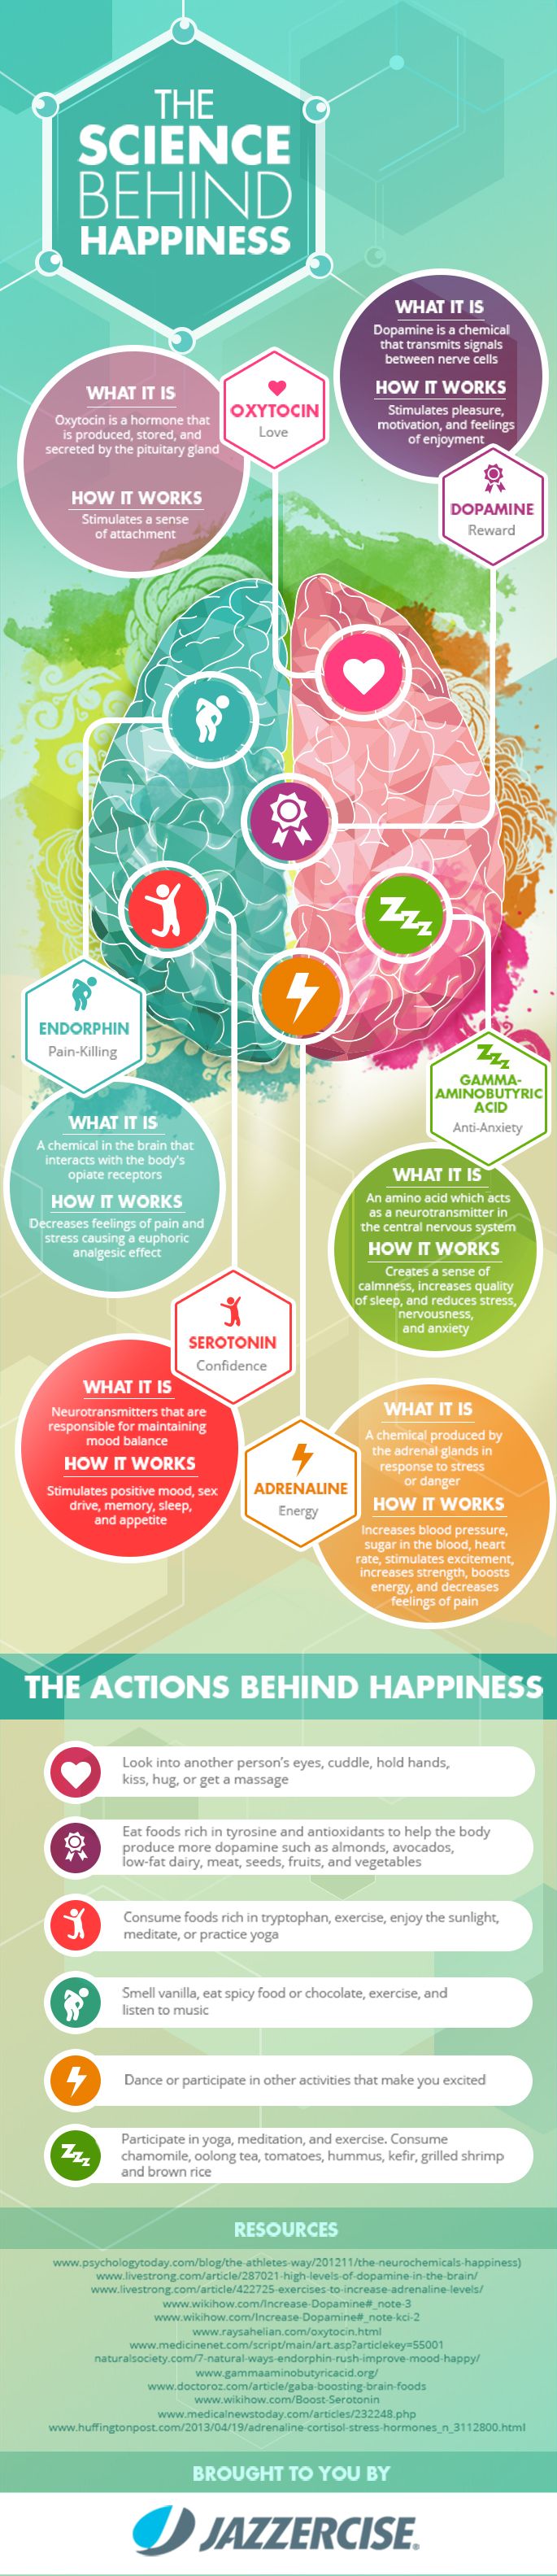 Psychology-Infographic-The-science-behind-happiness Psychology Infographic : The science behind happiness